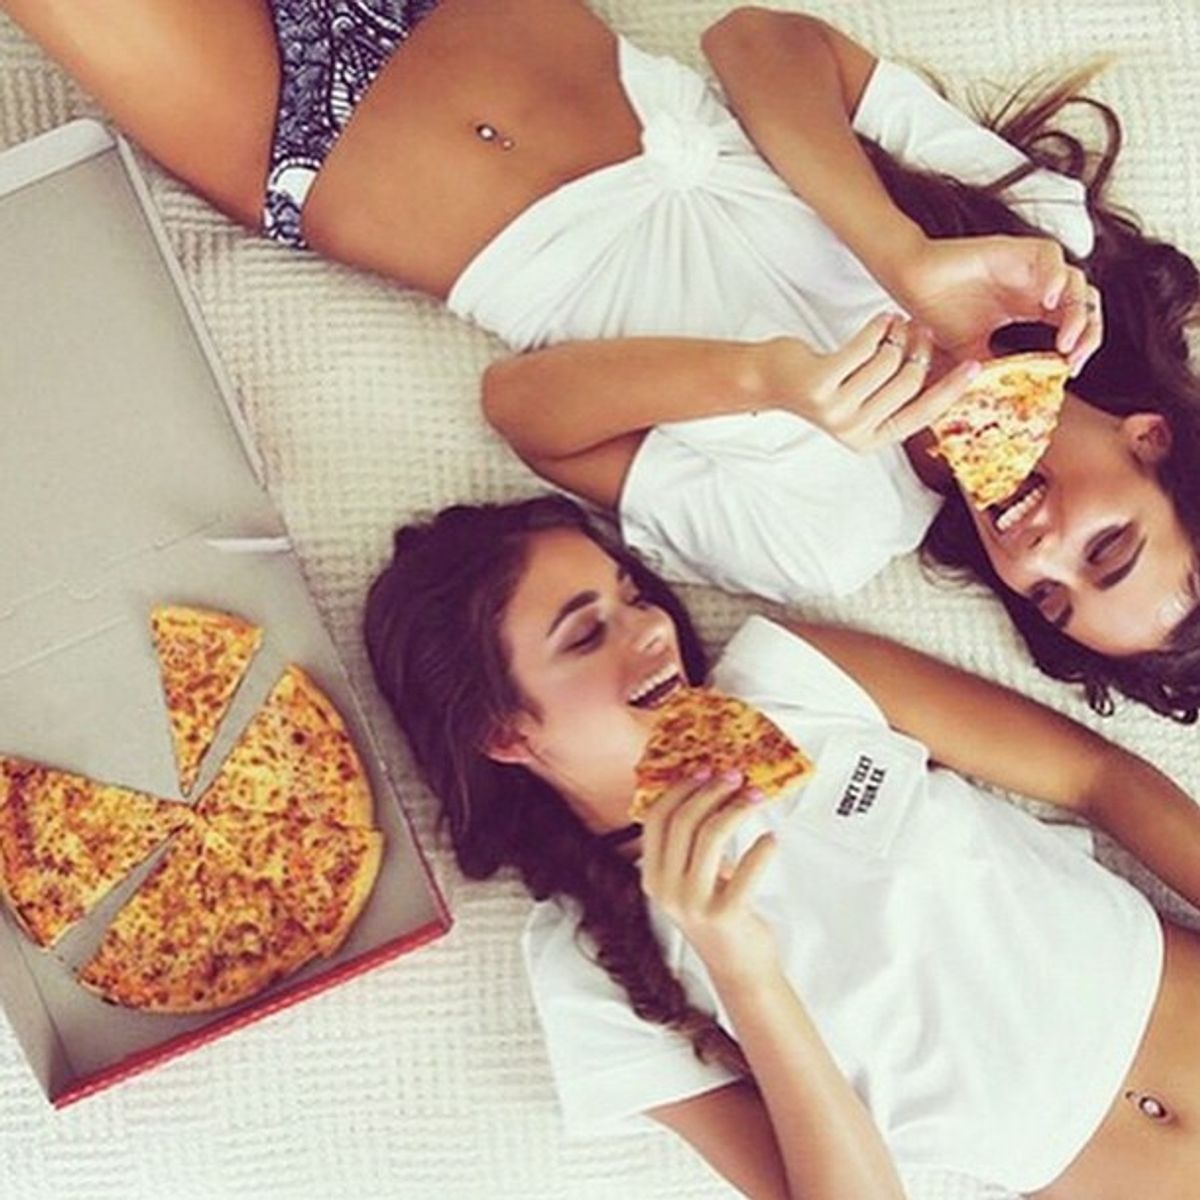 20 Reasons Why Pizza Is Better Than Guys